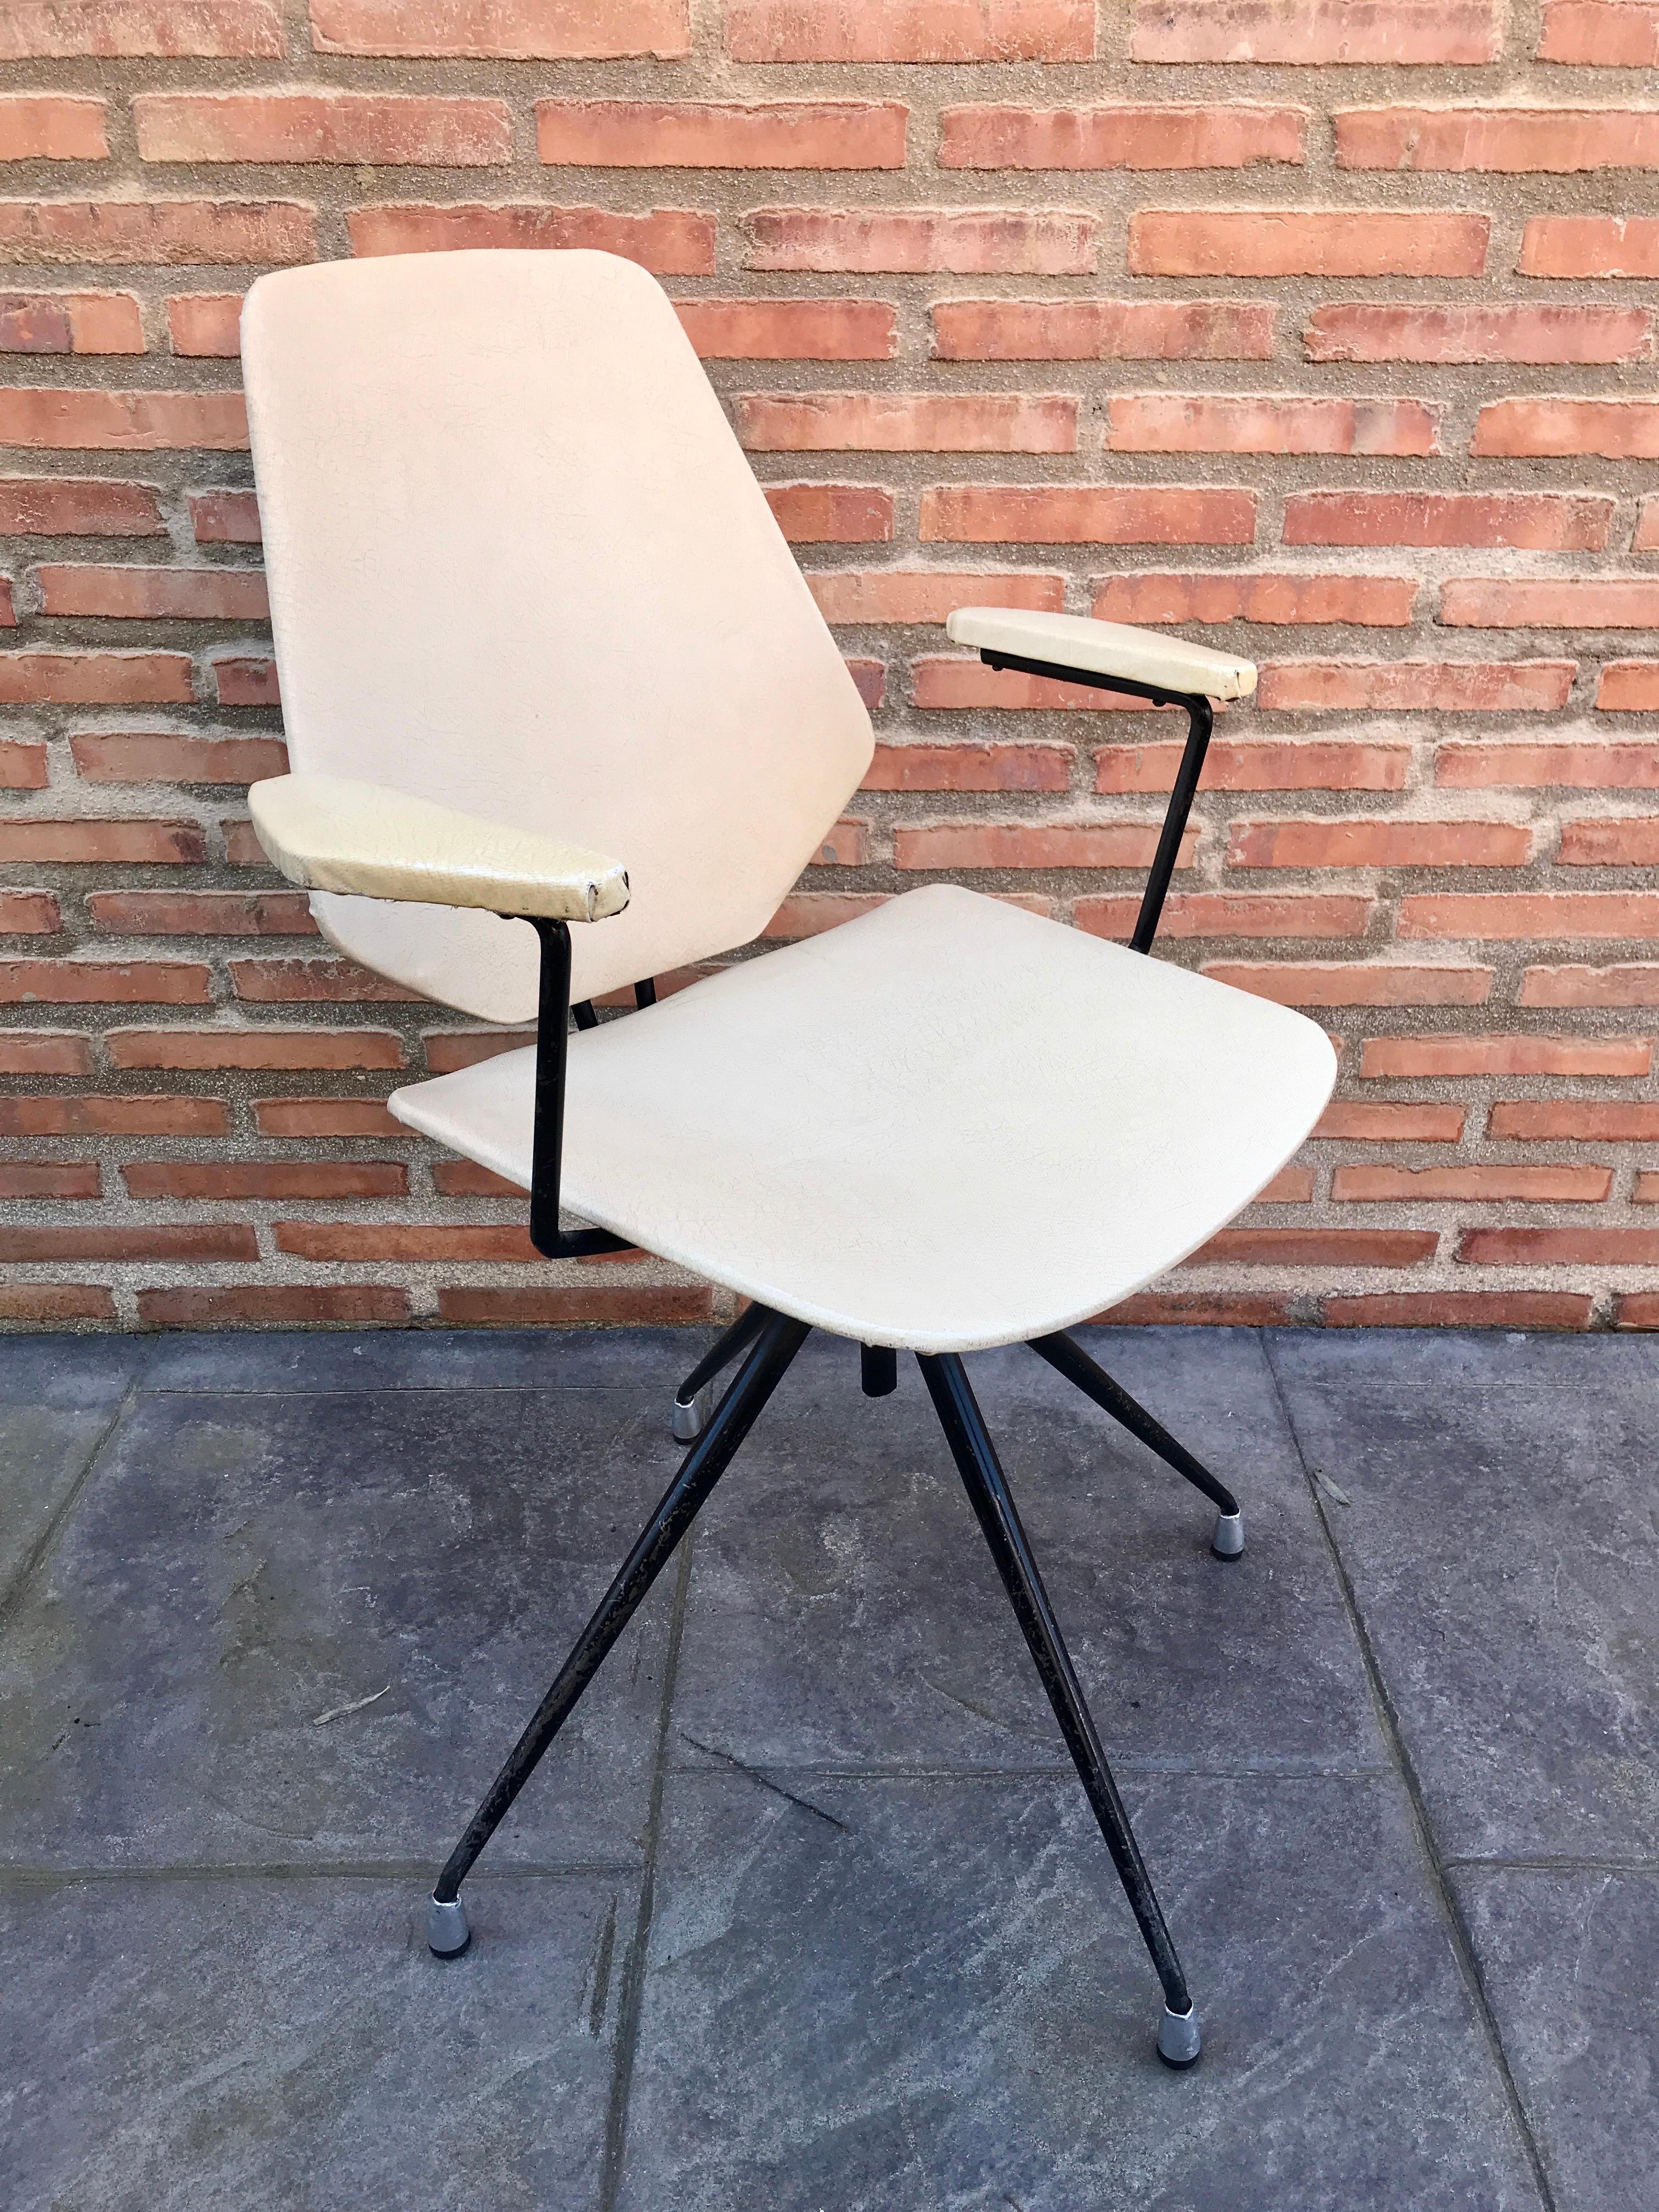 20th Century Italian Vintage Office or Desk Swivel Chair For Sale